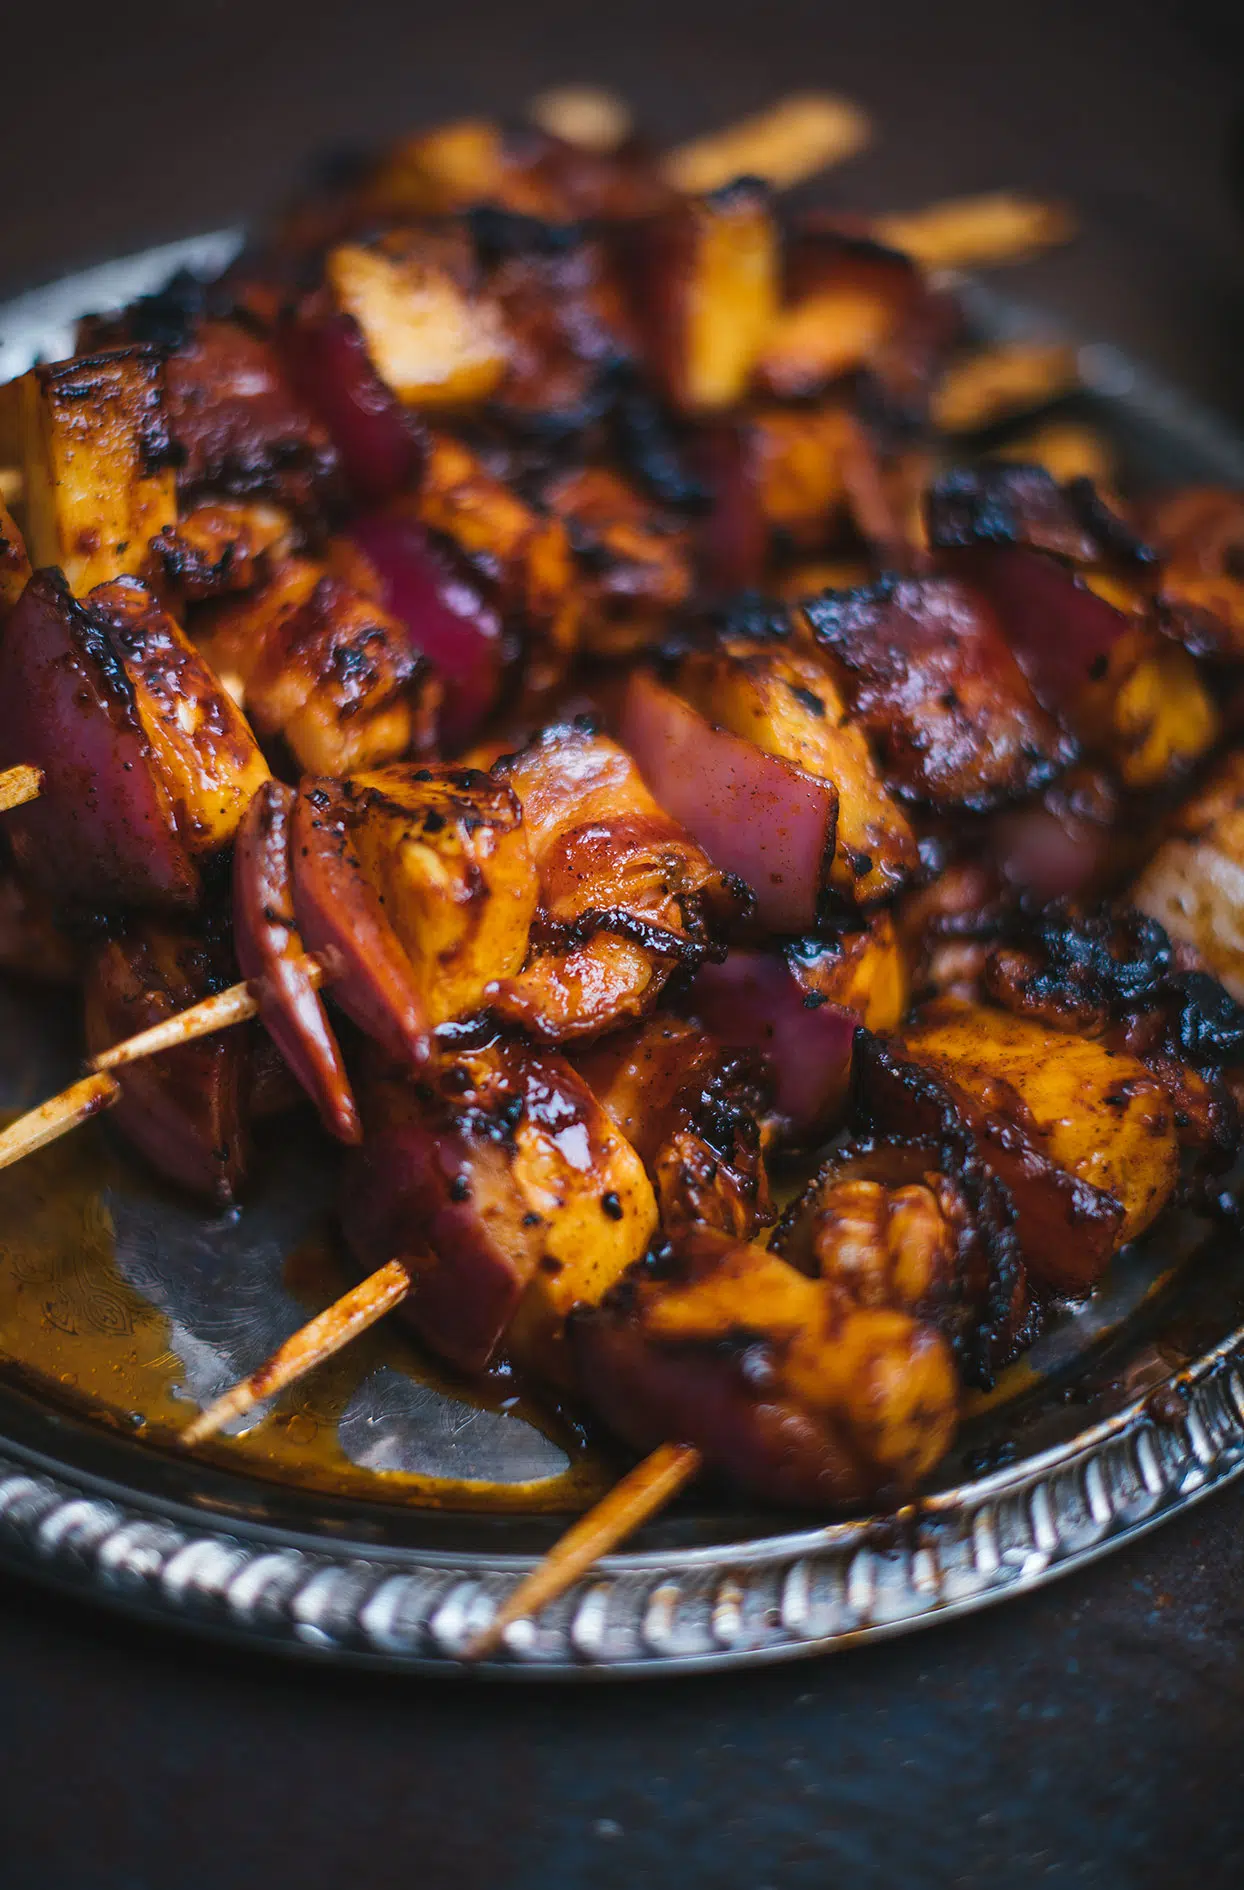 BBQ shrimp skewers with pepper bacon and pineapple